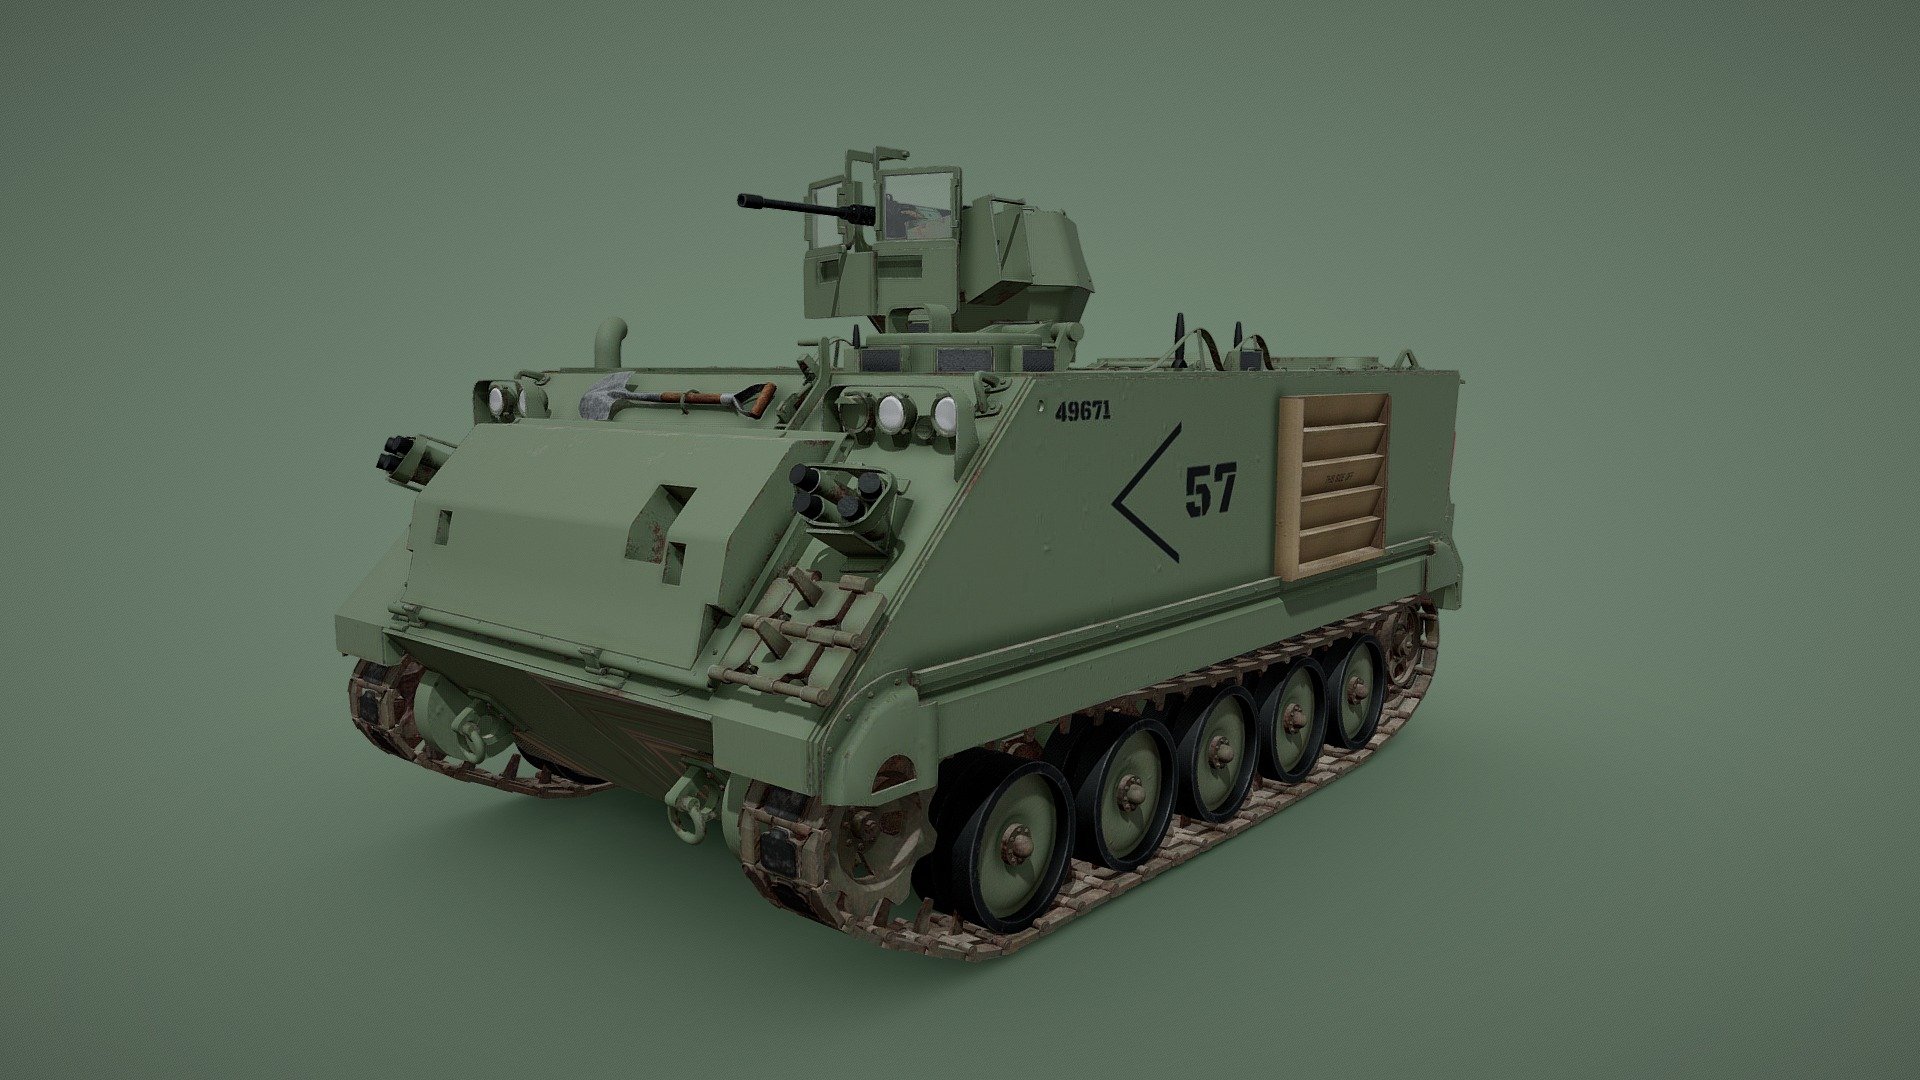 The M113 is a fully tracked armored personnel carrier (APC) that was developed and produced by the FMC Corporation. The M113 was sent to United States Army Europe to replace the mechanized infantry's M59 APCs from 1961. The M113 was first used in combat in April 1962 after the United States provided the South Vietnamese Army (ARVN) with heavy weaponry such as the M113, under the Military Assistance Command, Vietnam (MACV) program. Eventually, the M113 was the most widely used armored vehicle of the U.S. Army in the Vietnam War and was used to break through heavy thickets in the midst of the jungle to attack and overrun enemy positions. It was largely known as an &ldquo;APC